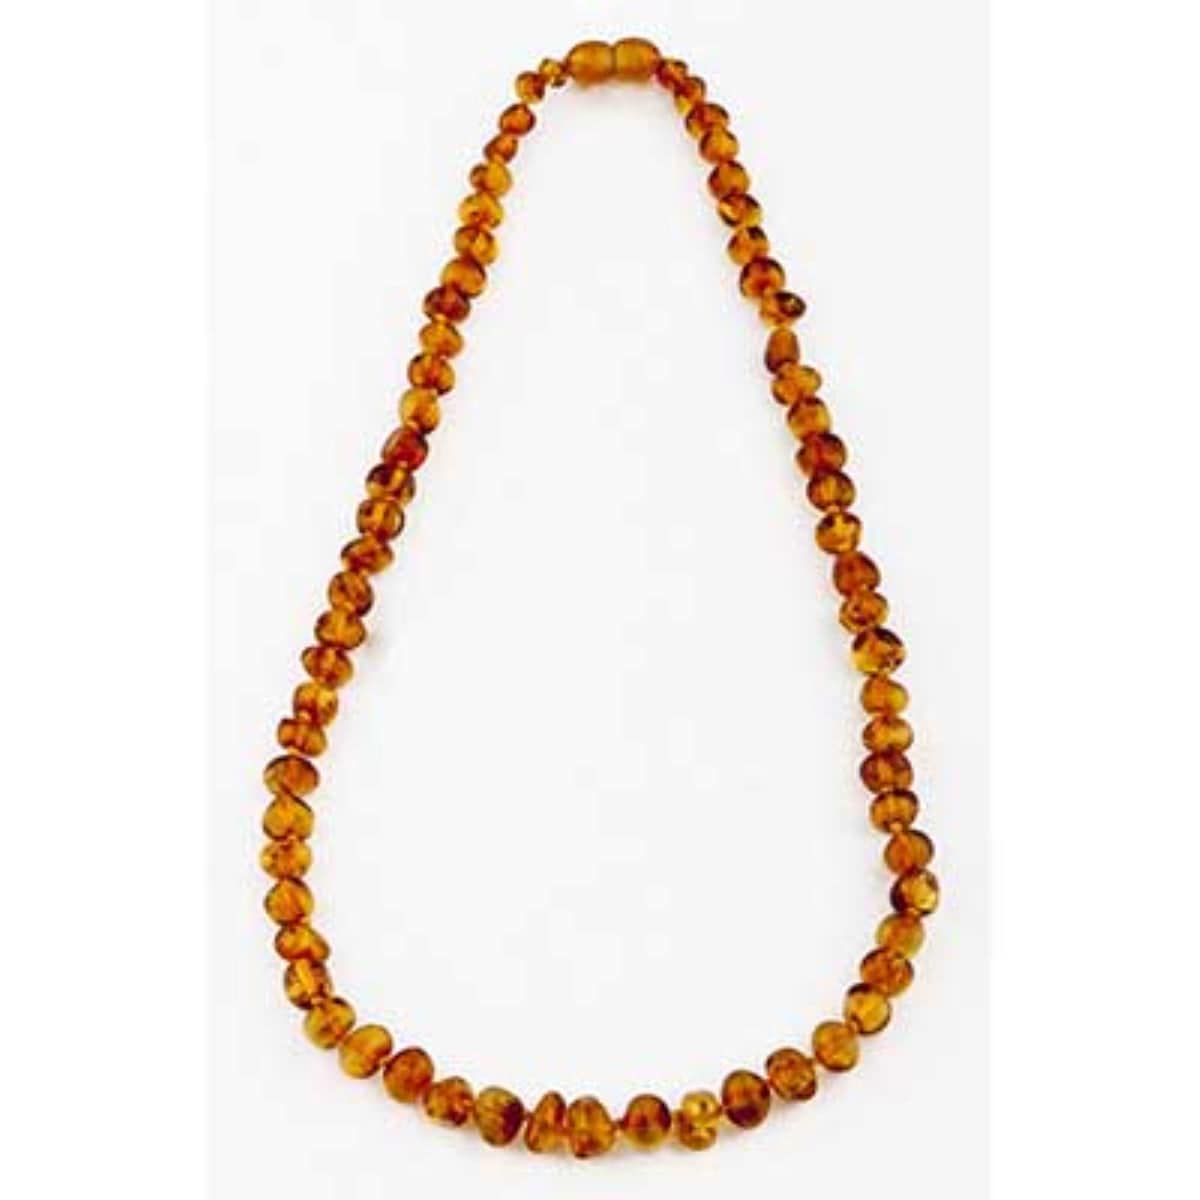 Nature's Child Amber Baby Necklace Cognac